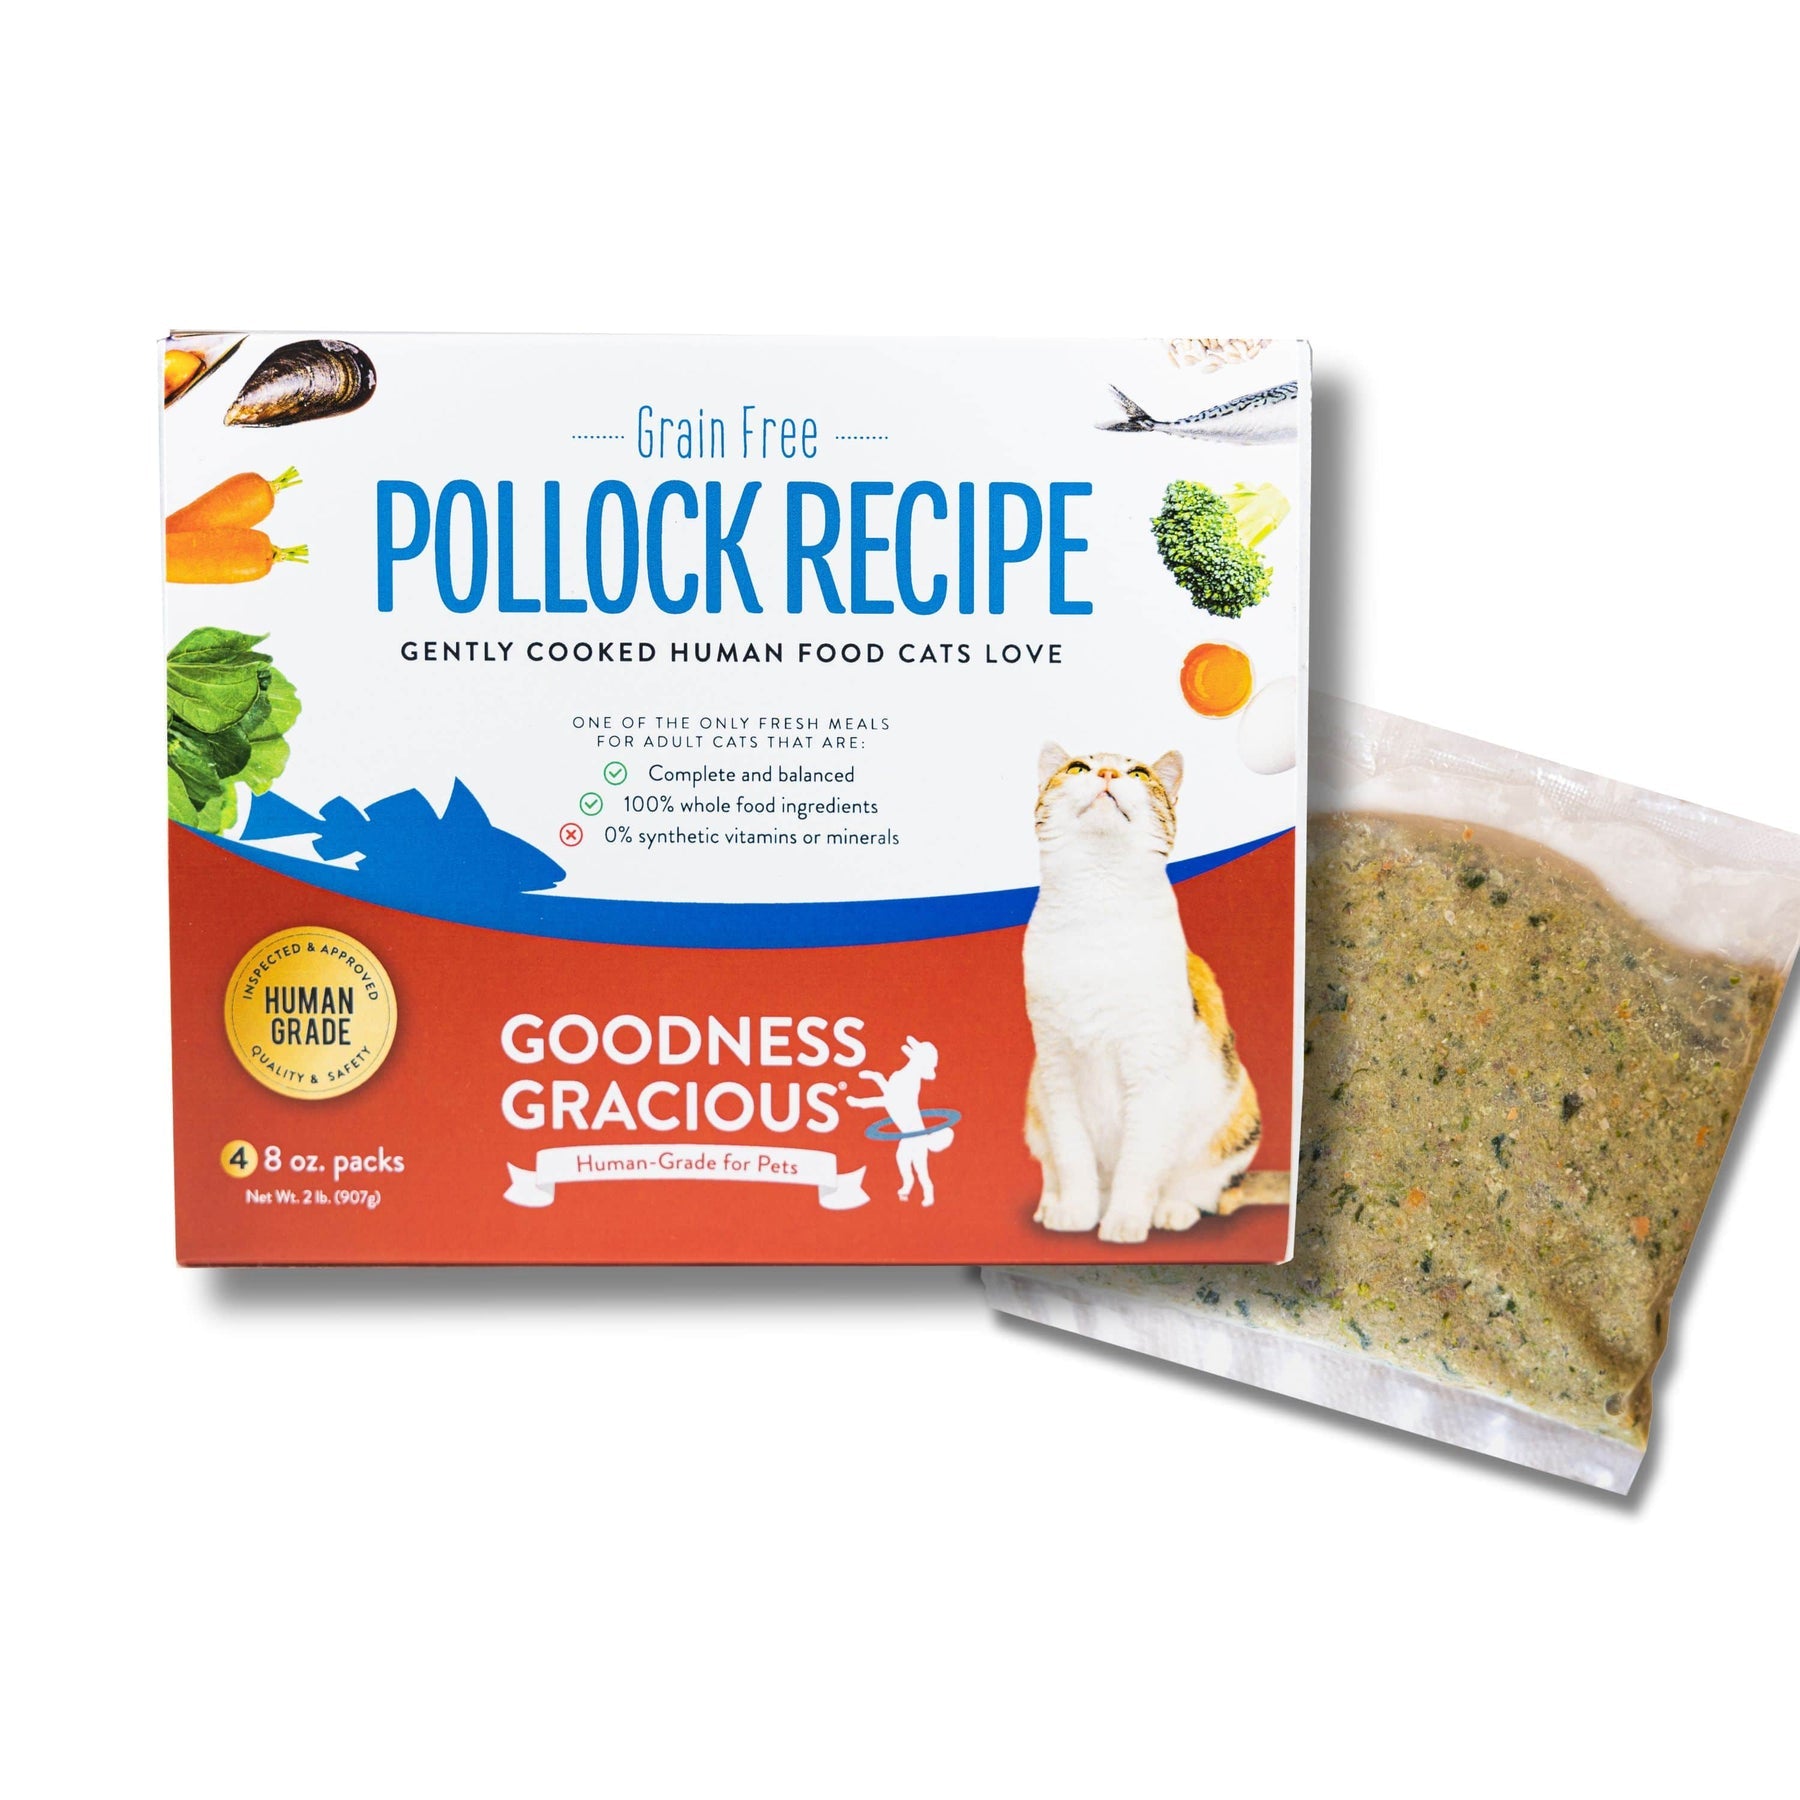 Goodness Gracious Human Grade Synthetic Free Pollock Recipe Gently Cooked Frozen Cat Food, 5ct/10lb Case